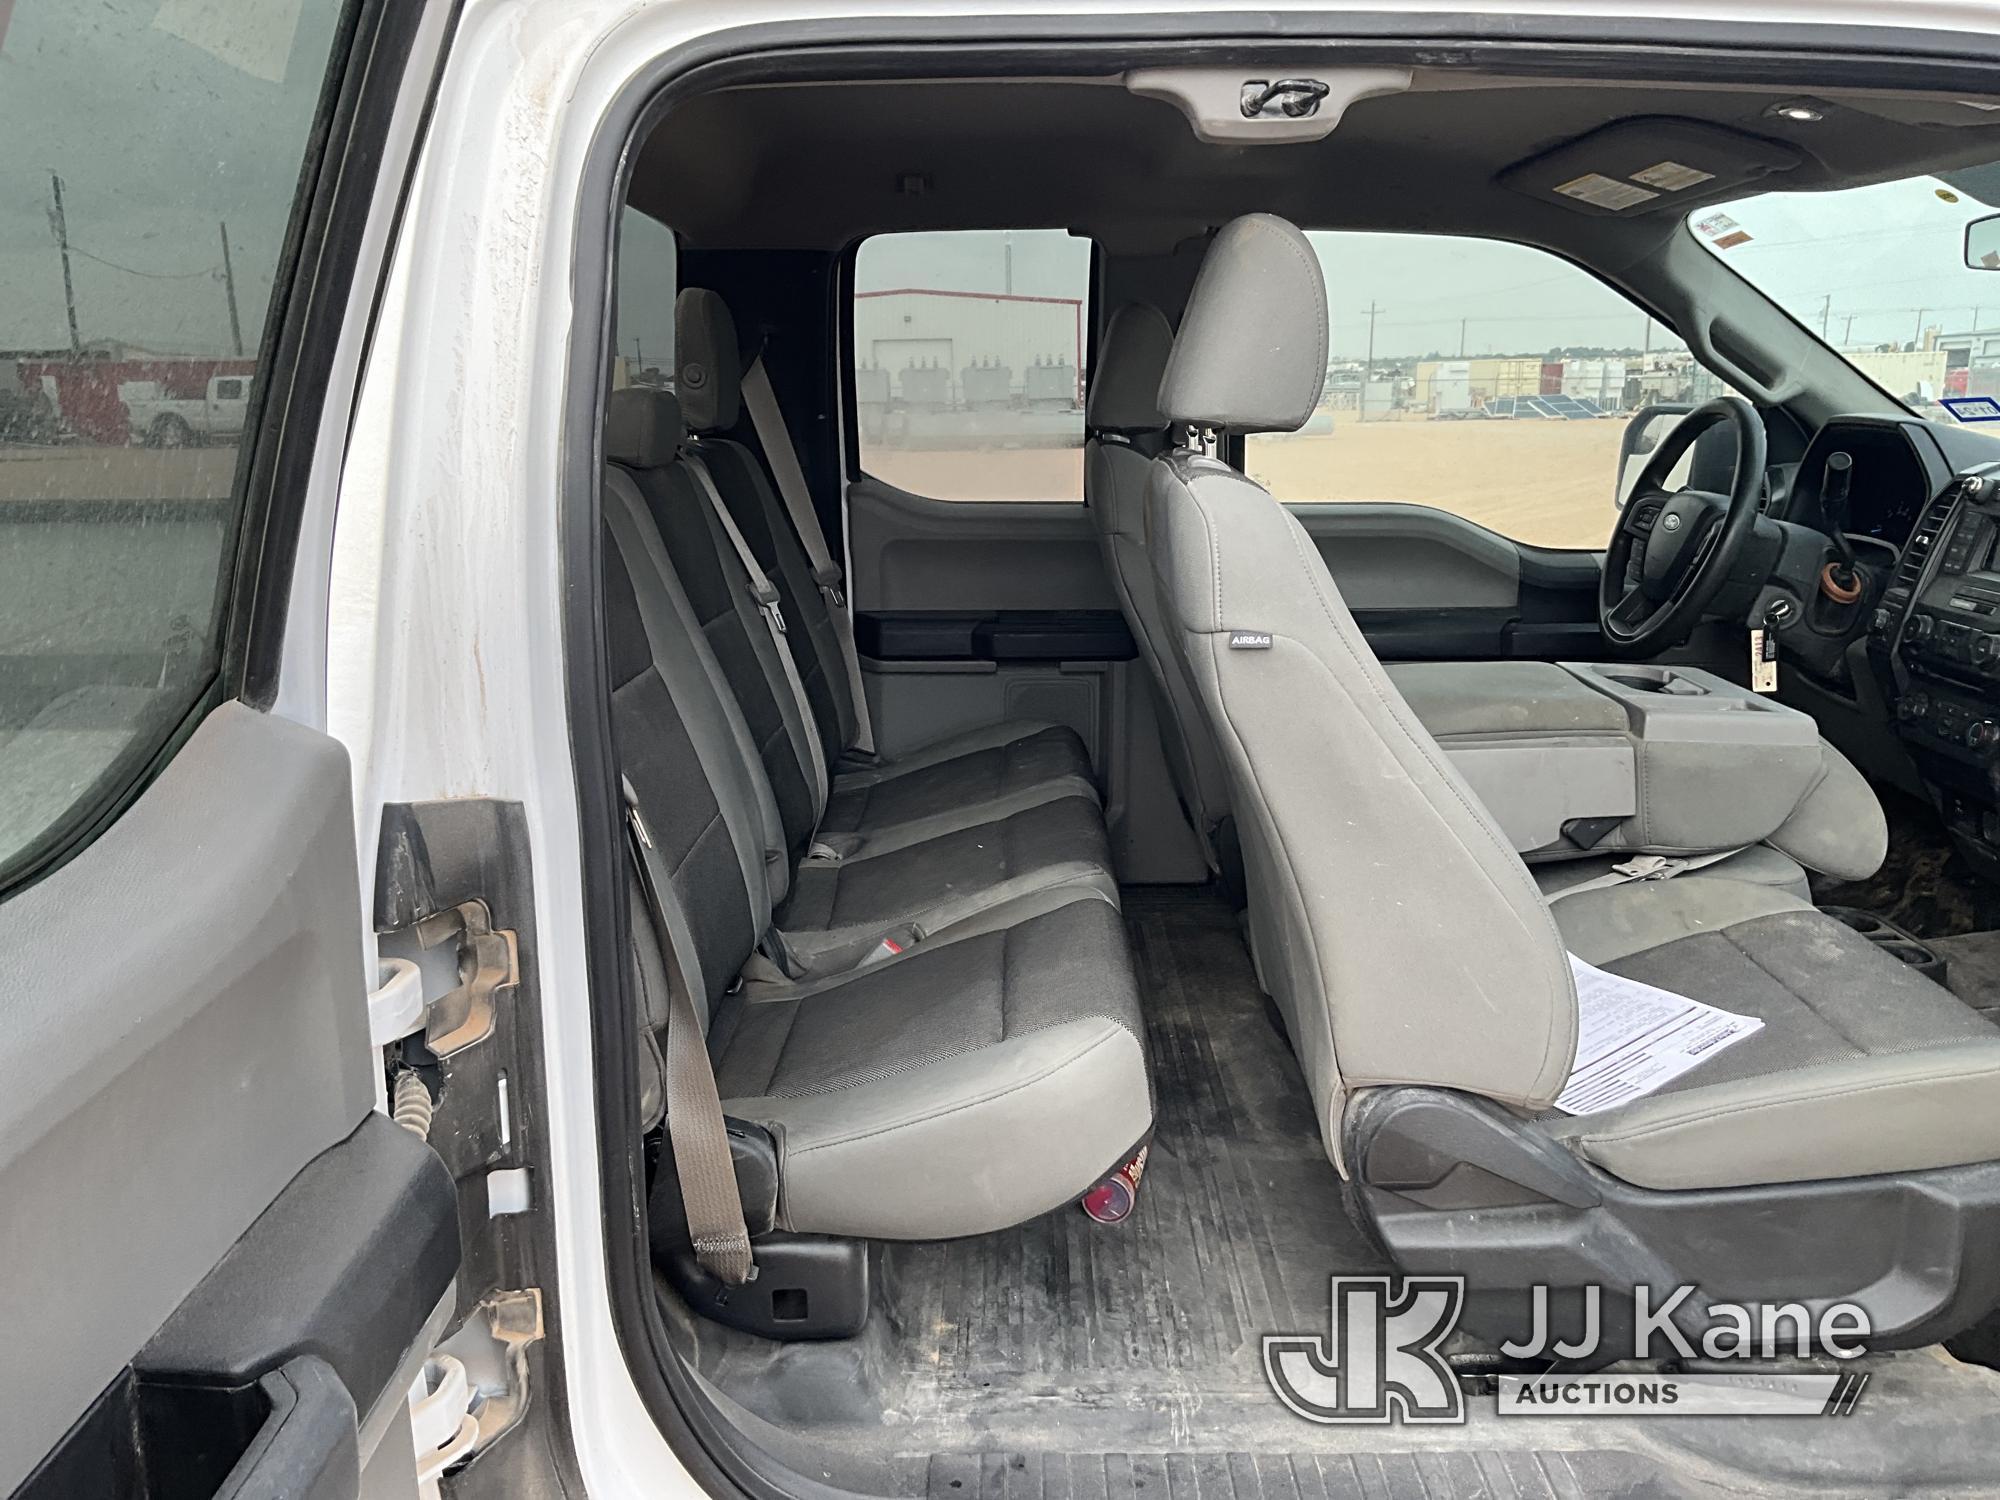 (Midland, TX) 2017 Ford F150 4x4 Extended-Cab Pickup Truck Runs & Moves) (Jump To Start, Paint & Bod